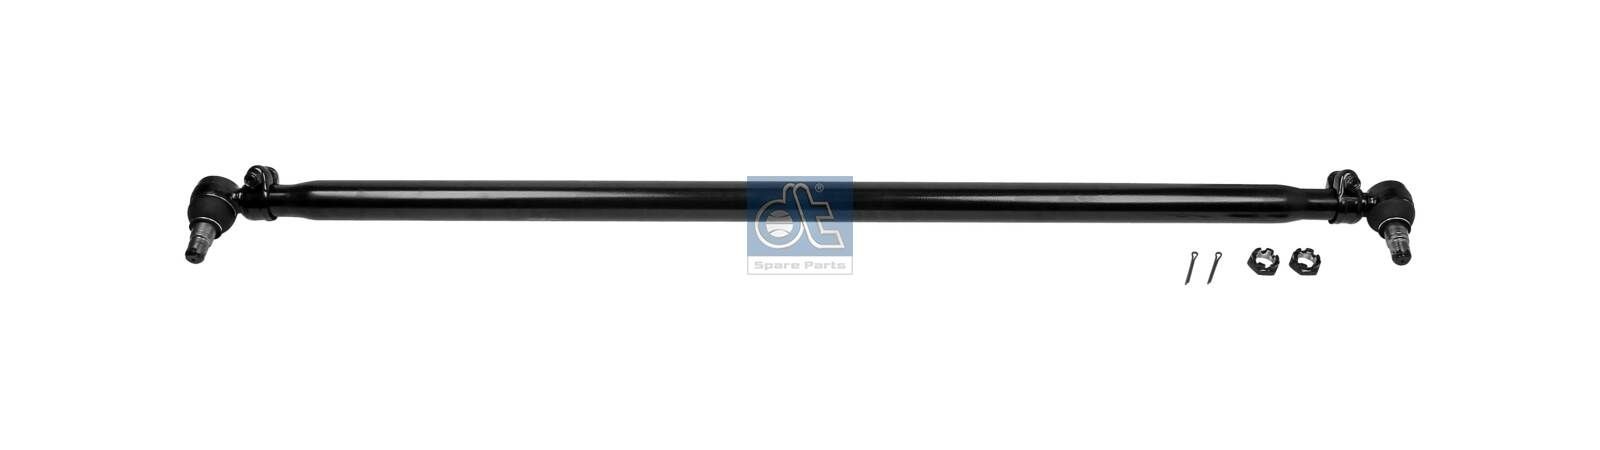 DT Spare Parts 7.30011 Rod Assembly 41033237